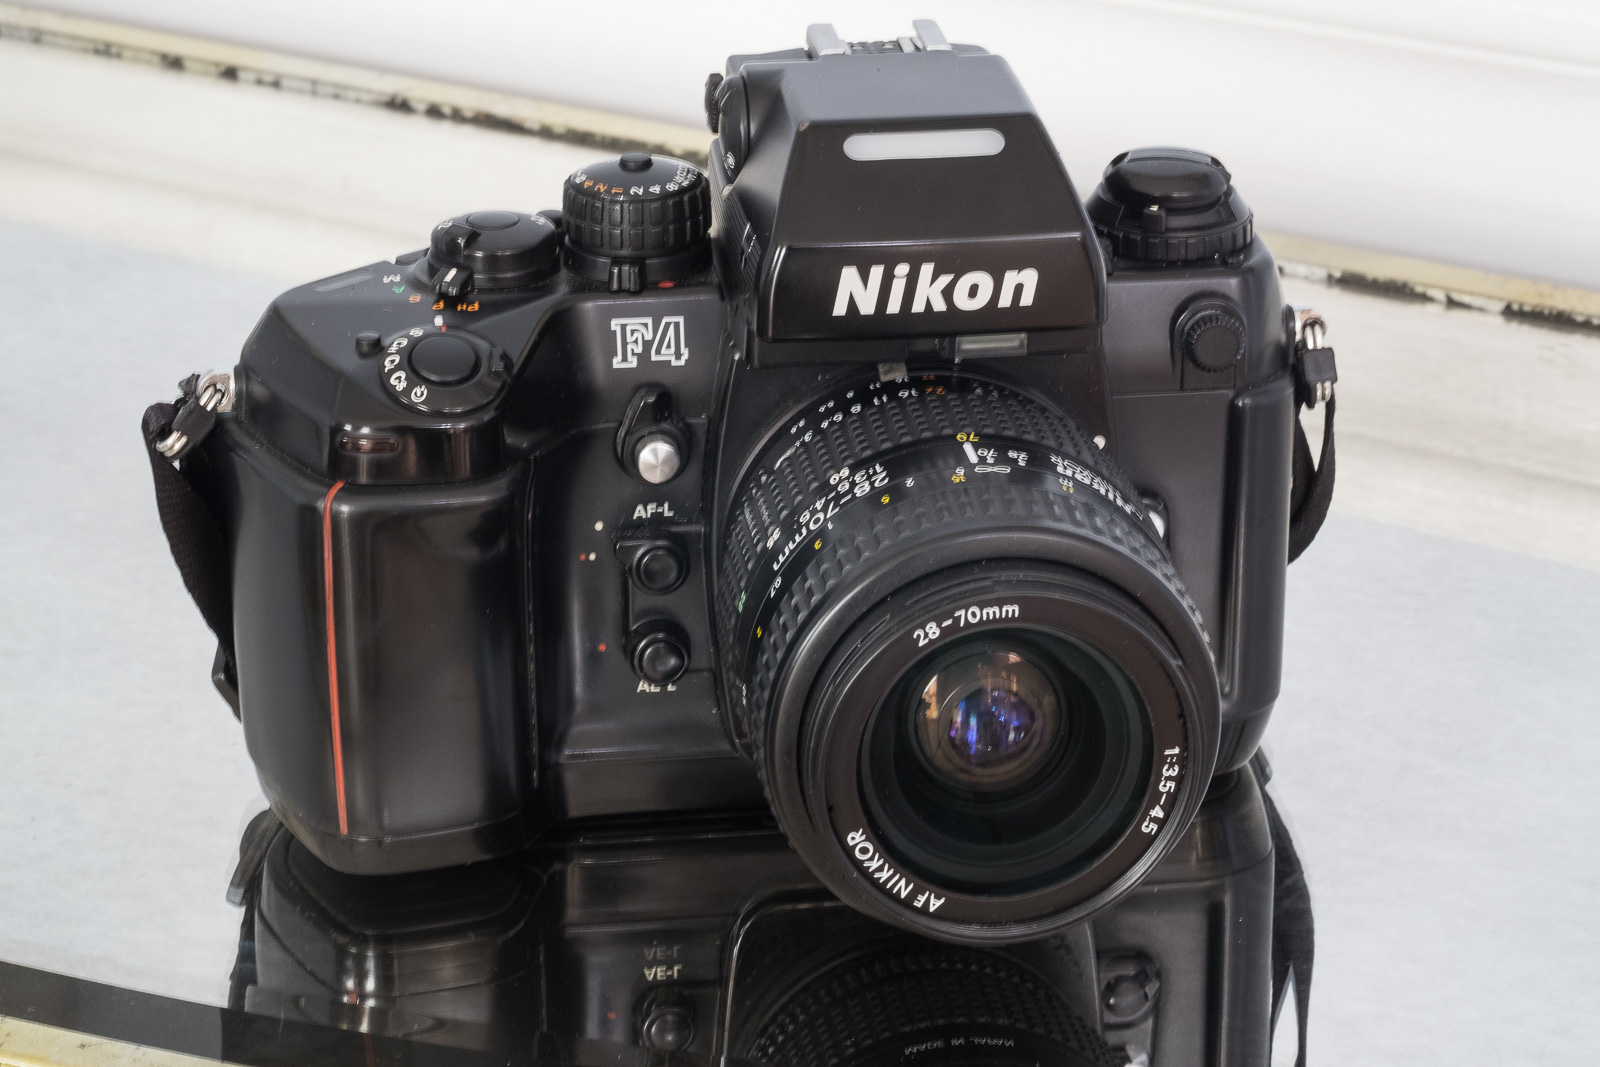 Nikon F4 – CamerAgX – a new life for old gear